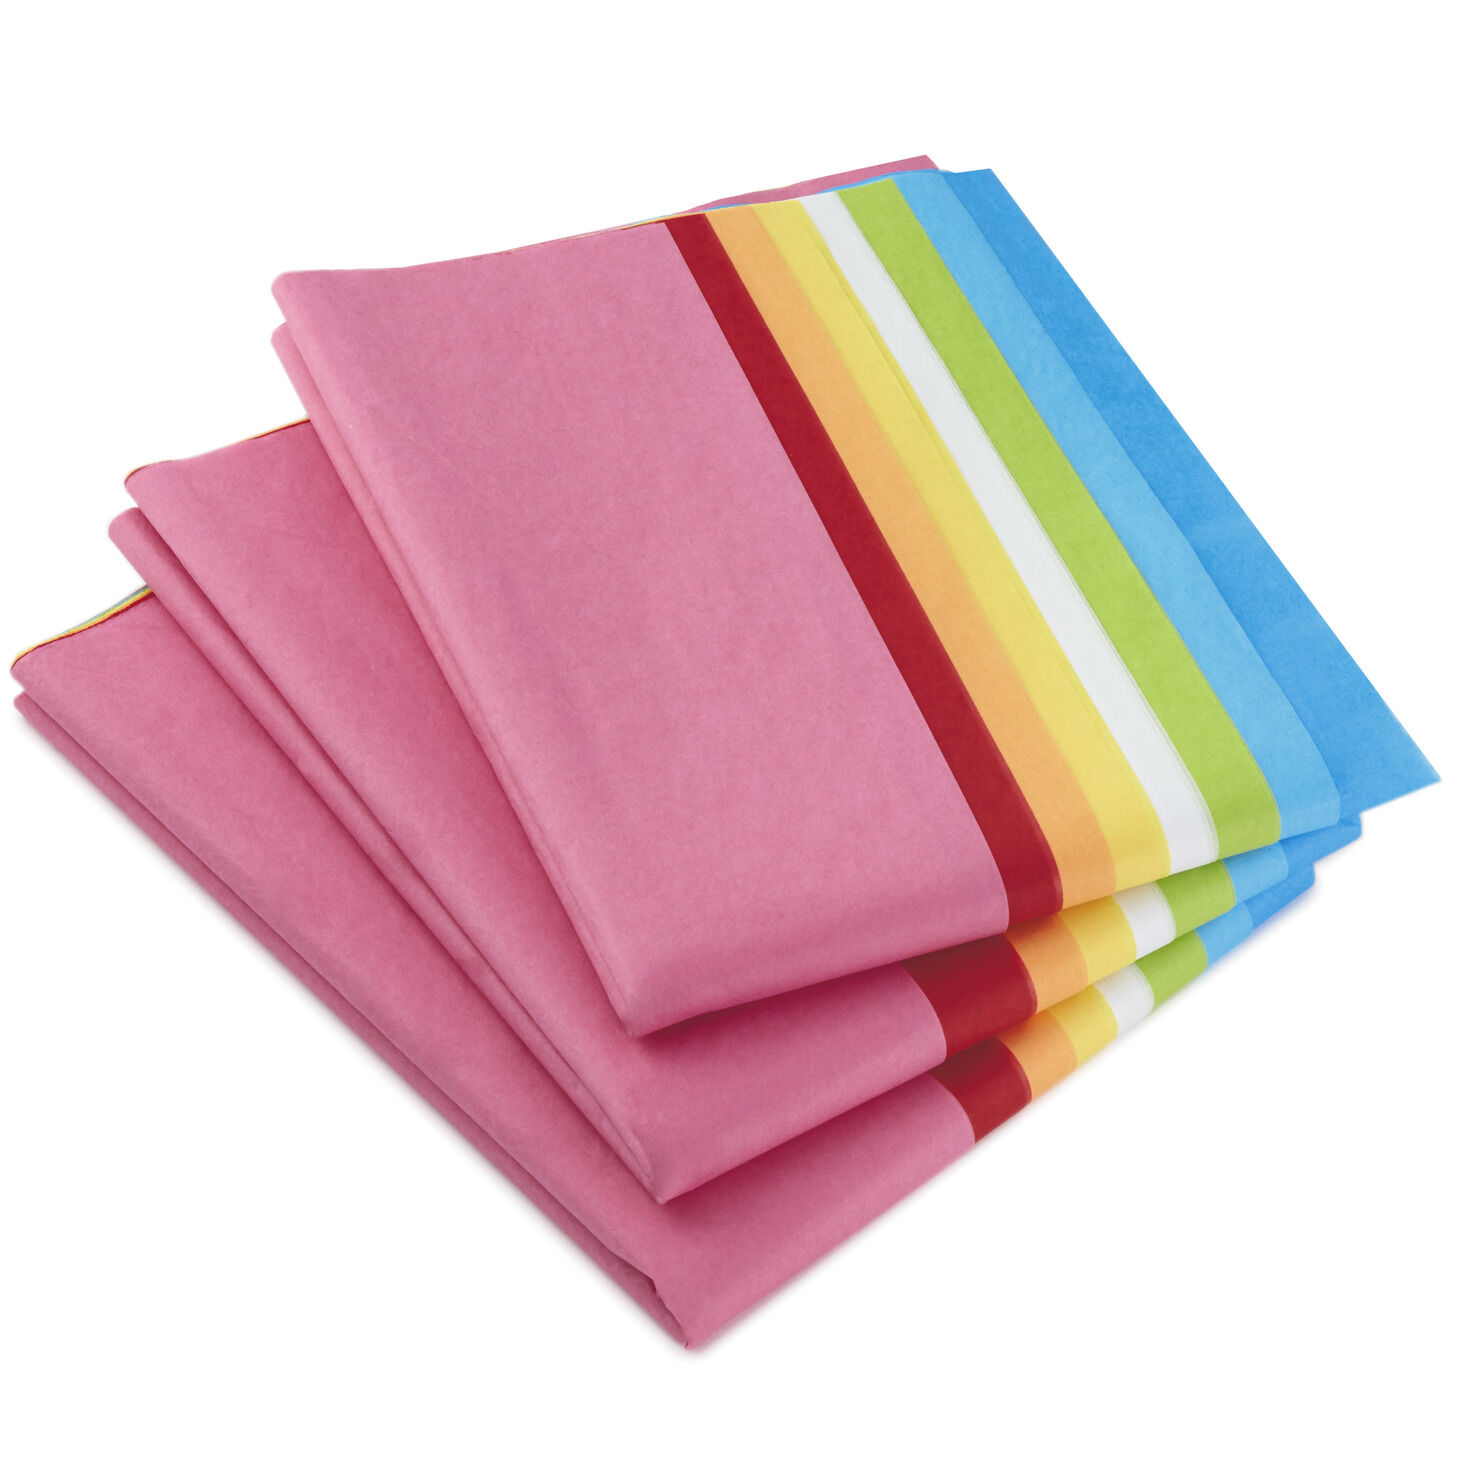 Assorted Rainbow Colors Bulk Tissue Paper, 120 sheets - Tissue